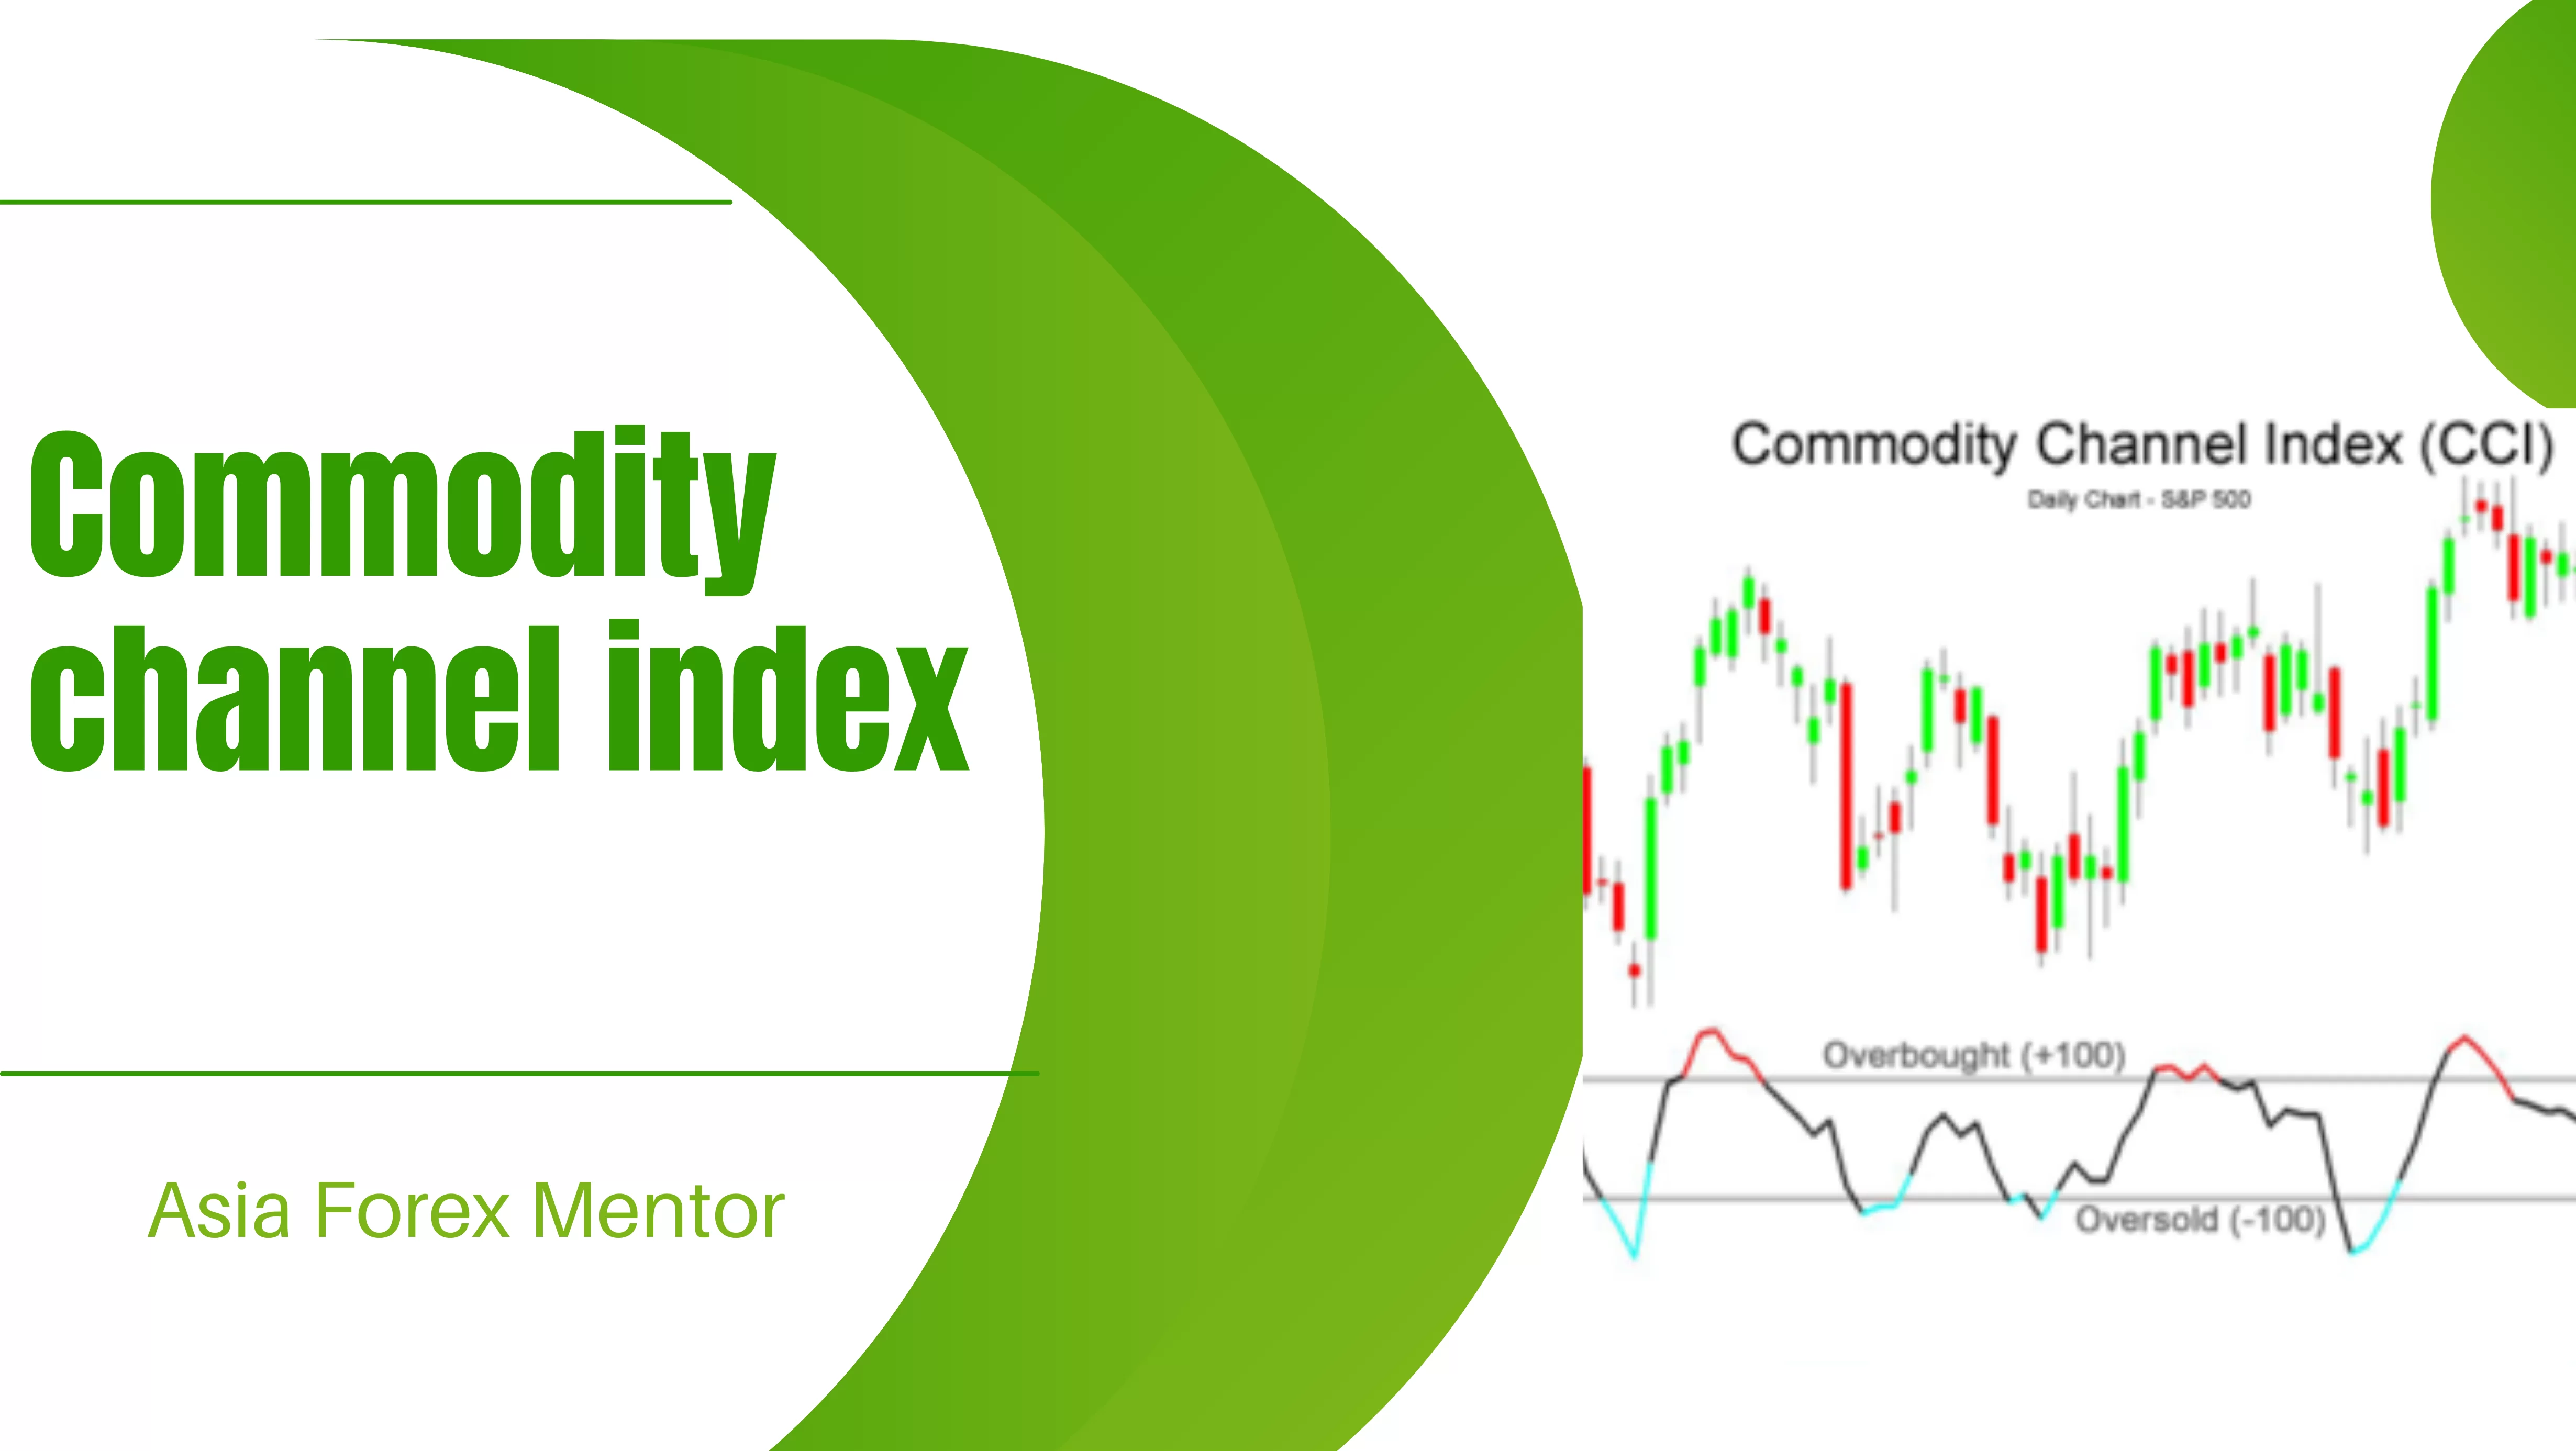 Commodity channel index